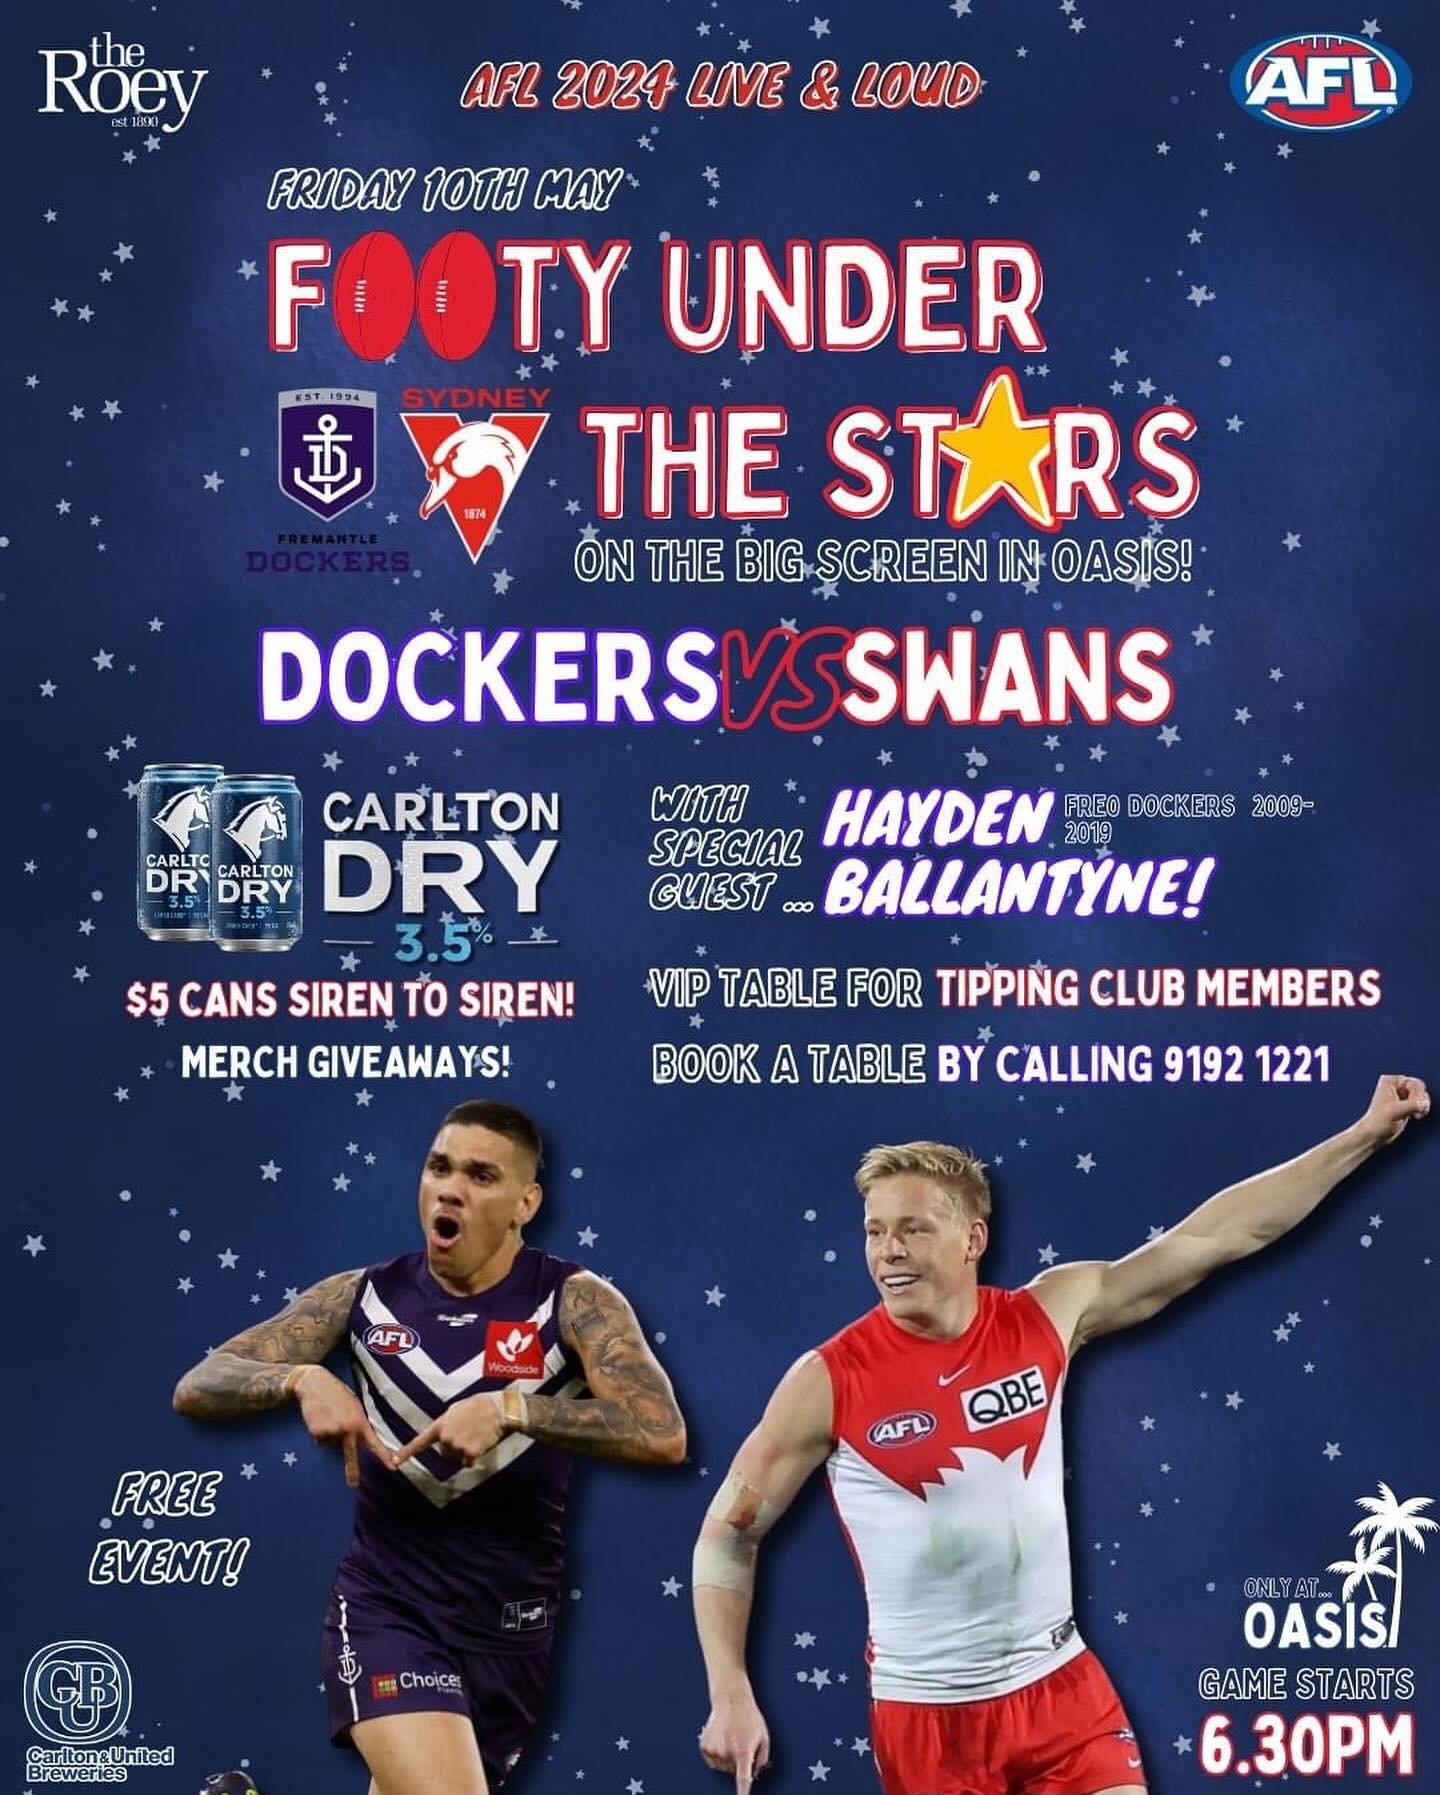 📣CALLING ALL FOOTY FANS📣

Join us this Friday 10th May for a very special FOOTY UNDER THE STARS 🏉✨ in Oasis from 6pm 🌴

Watch the 🟣DOCKERS VS SWANS🔴 on the biiiig screen &amp; even bigger sound system 🔊 commentary so crisp you&rsquo;d think yo